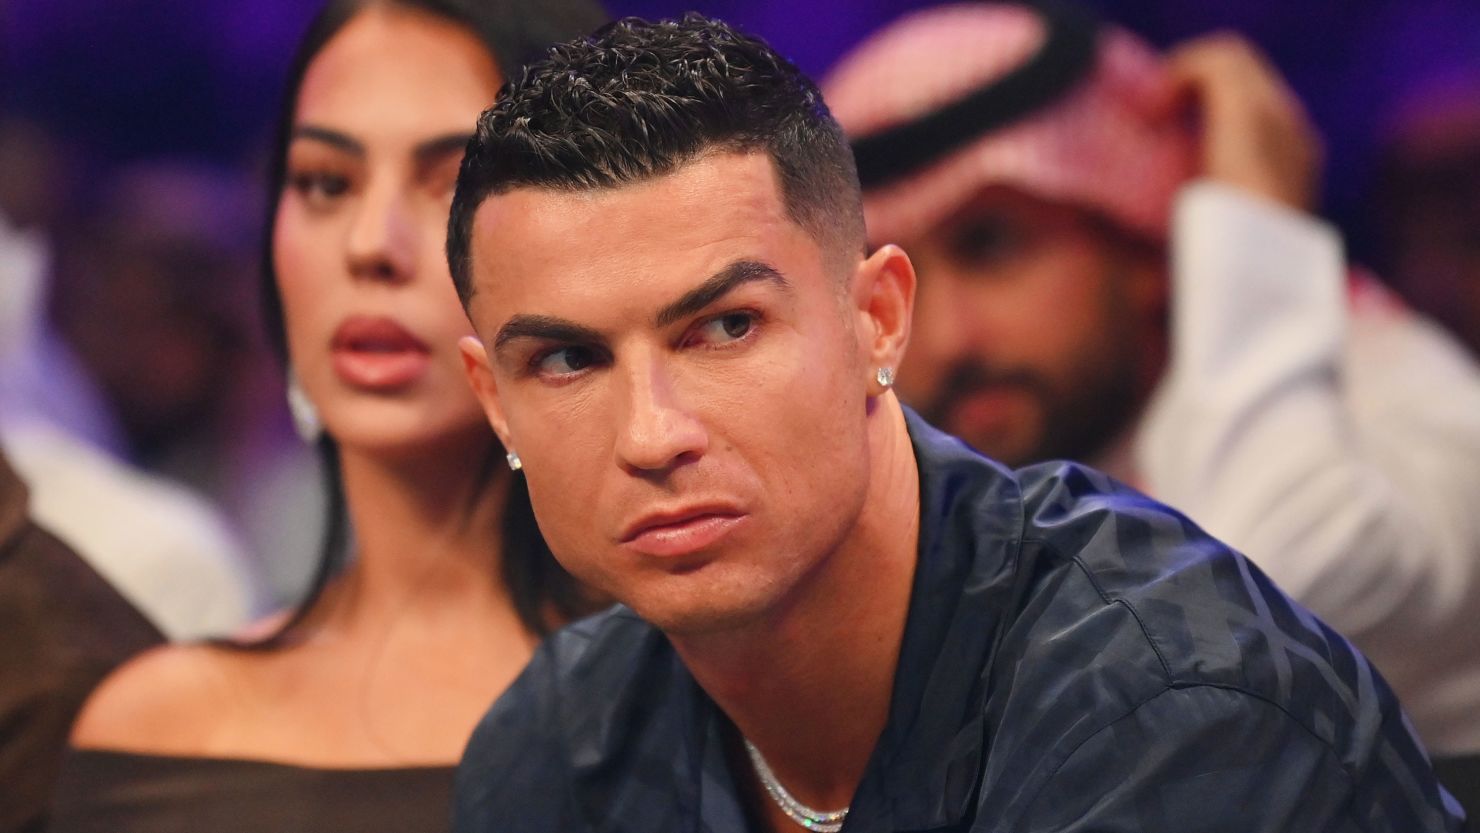 RIYADH, SAUDI ARABIA - OCTOBER 28: Cristiano Ronaldo looks on from ringside prior to the Heavyweight fight between Tyson Fury and Francis Ngannou at Boulevard Hall on October 28, 2023 in Riyadh, Saudi Arabia. (Photo by Justin Setterfield/Getty Images)